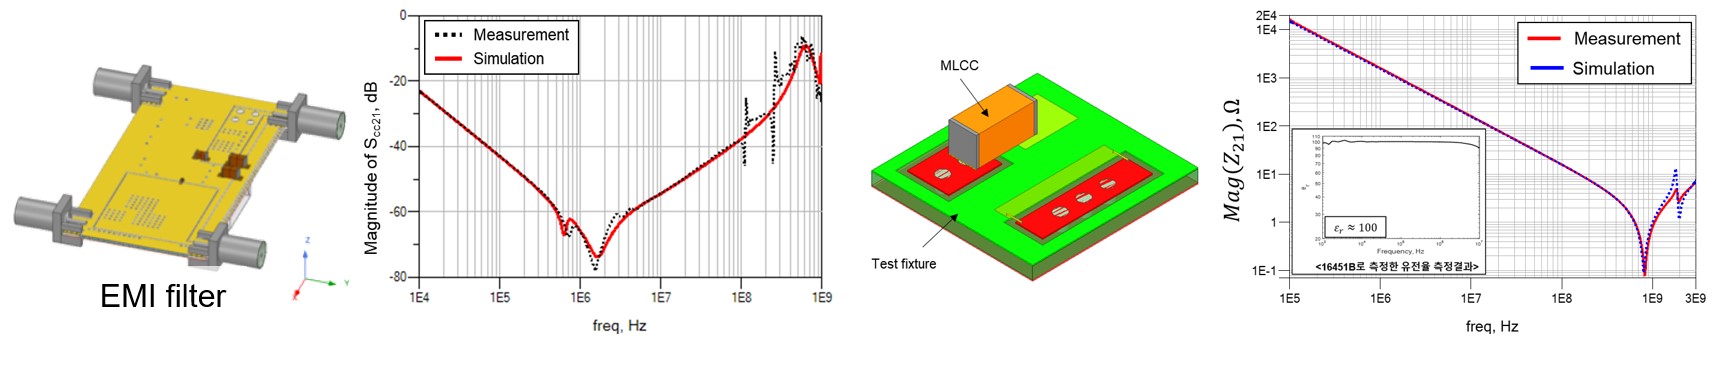 3D modeling and analysis of EMI filter and MLCC 이미지